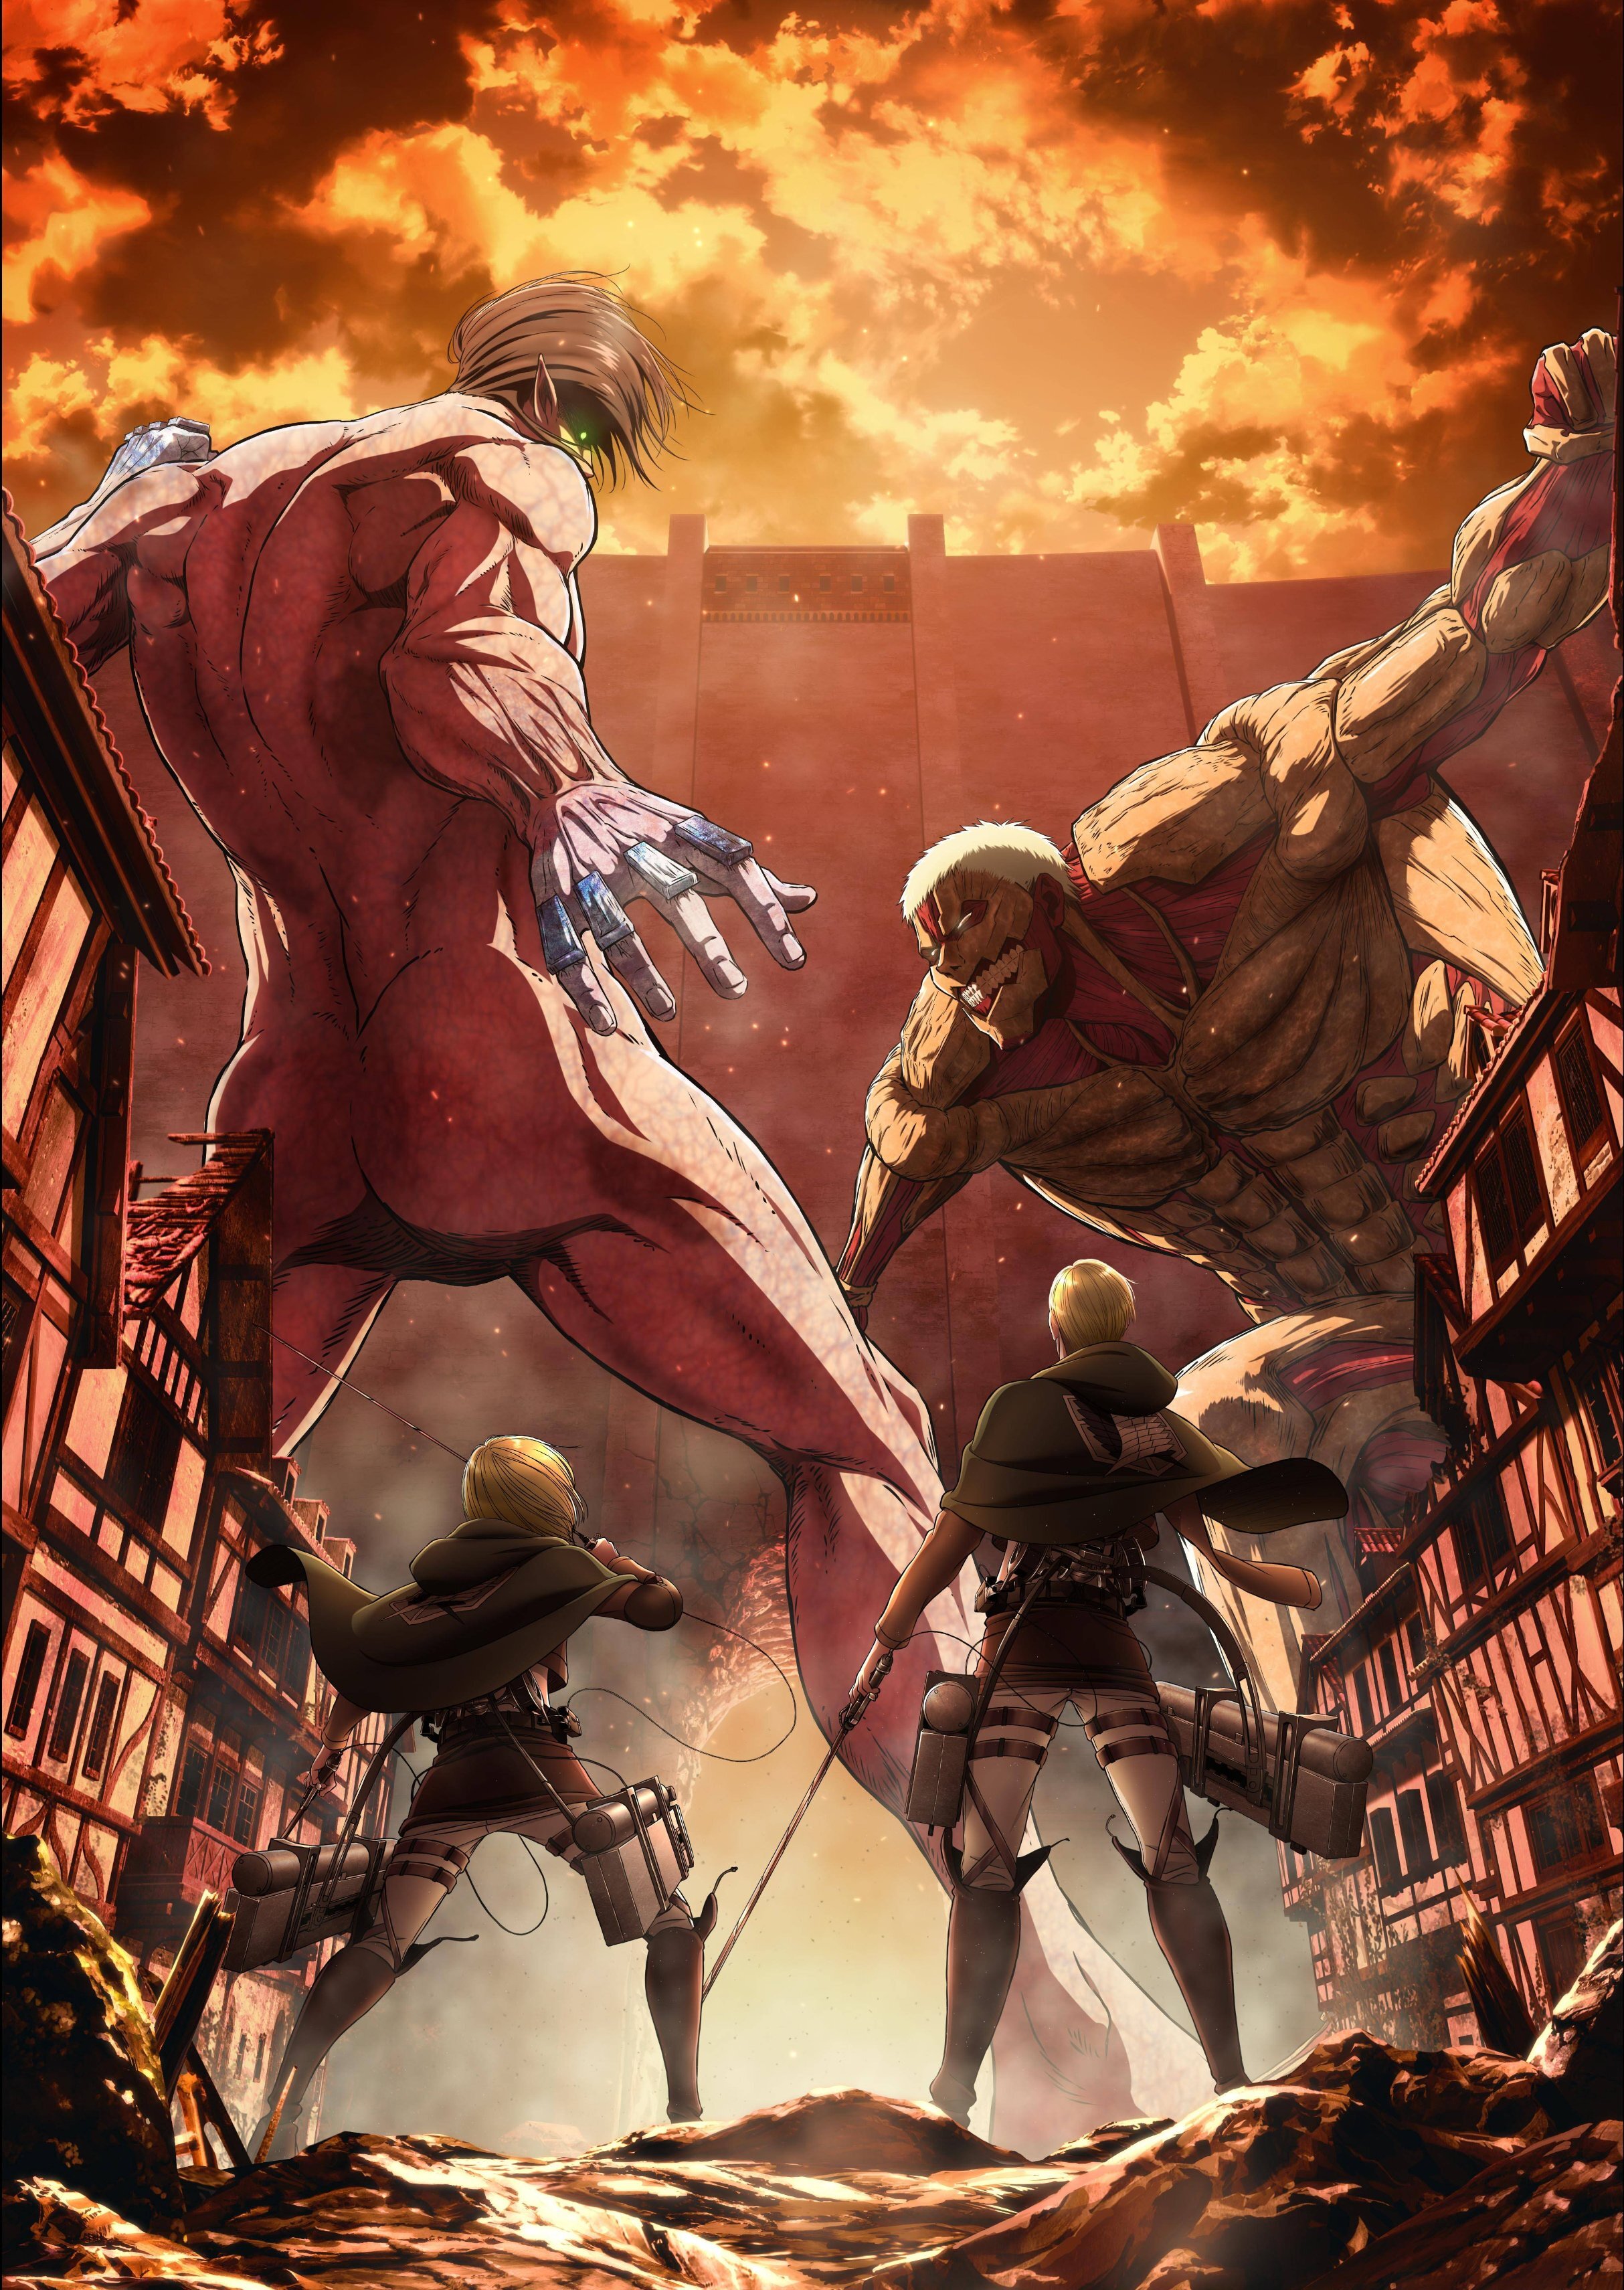 Attack on Titan should be your next watch regardless if you are an anime  fan